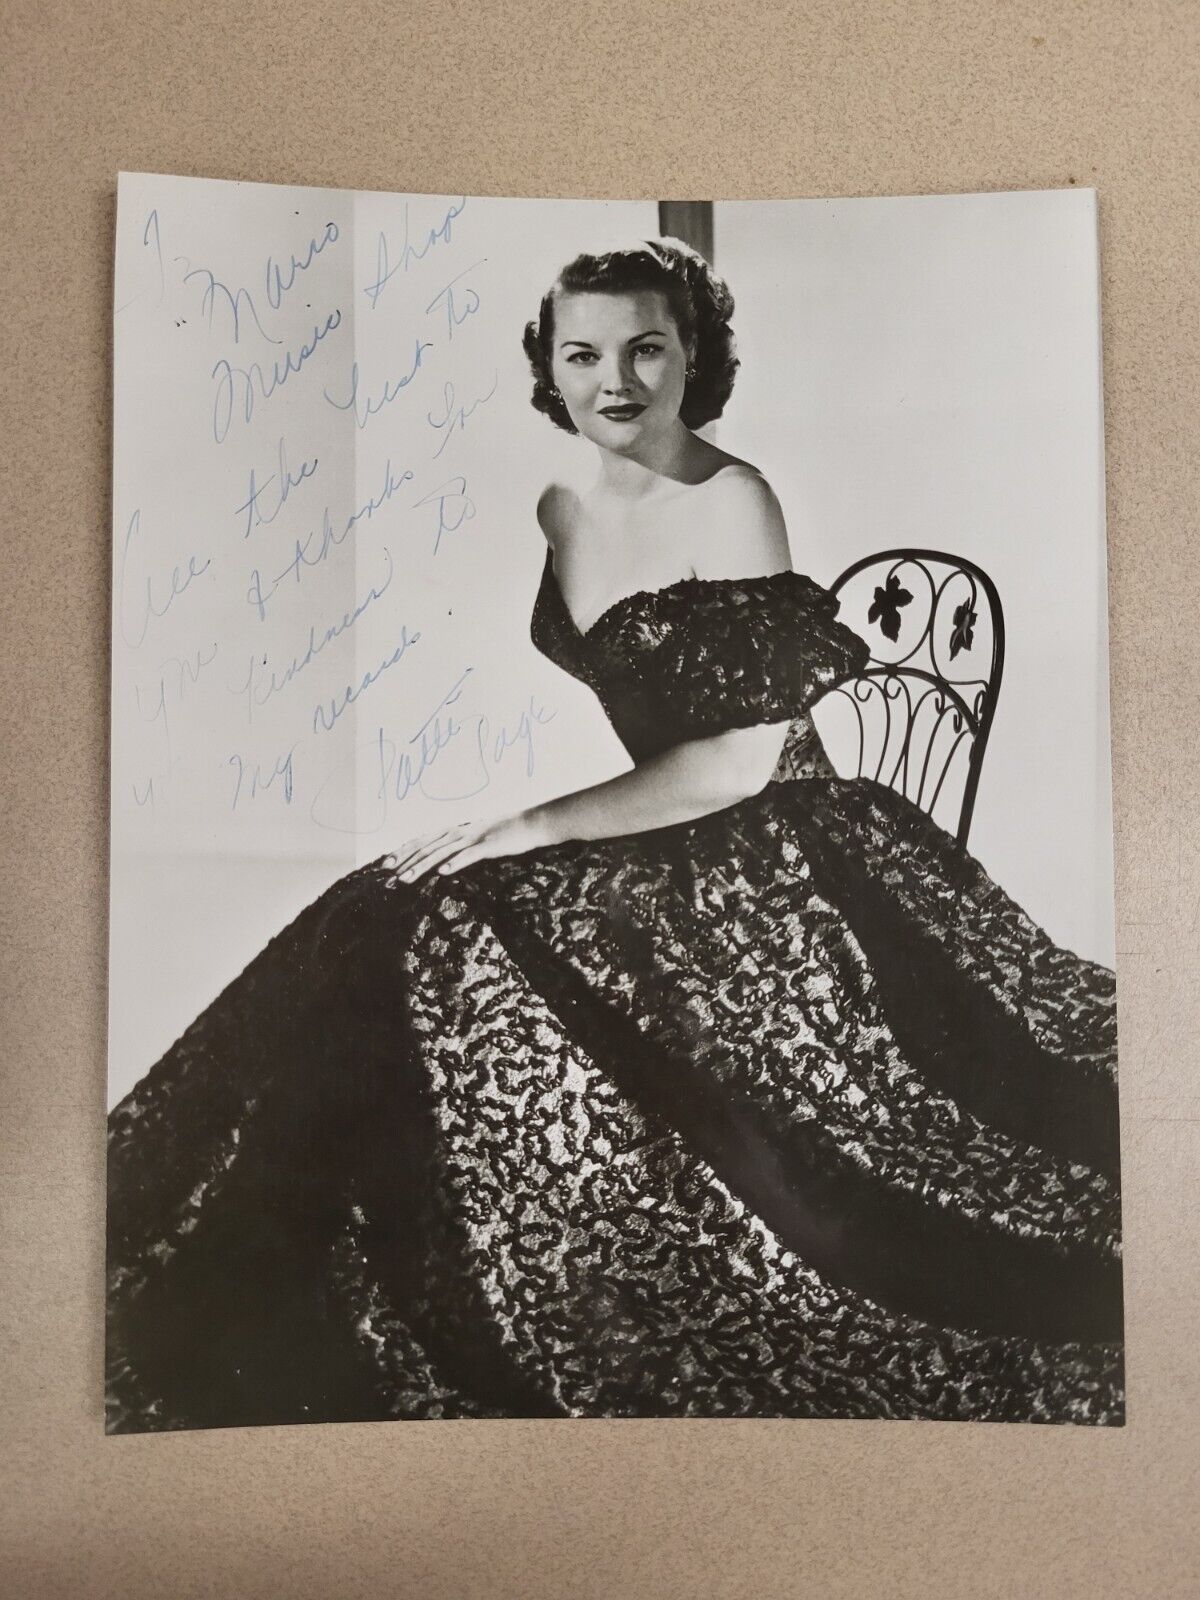 To Mario Music Shop All The Best To You Regards Patti Page Signed Photograph